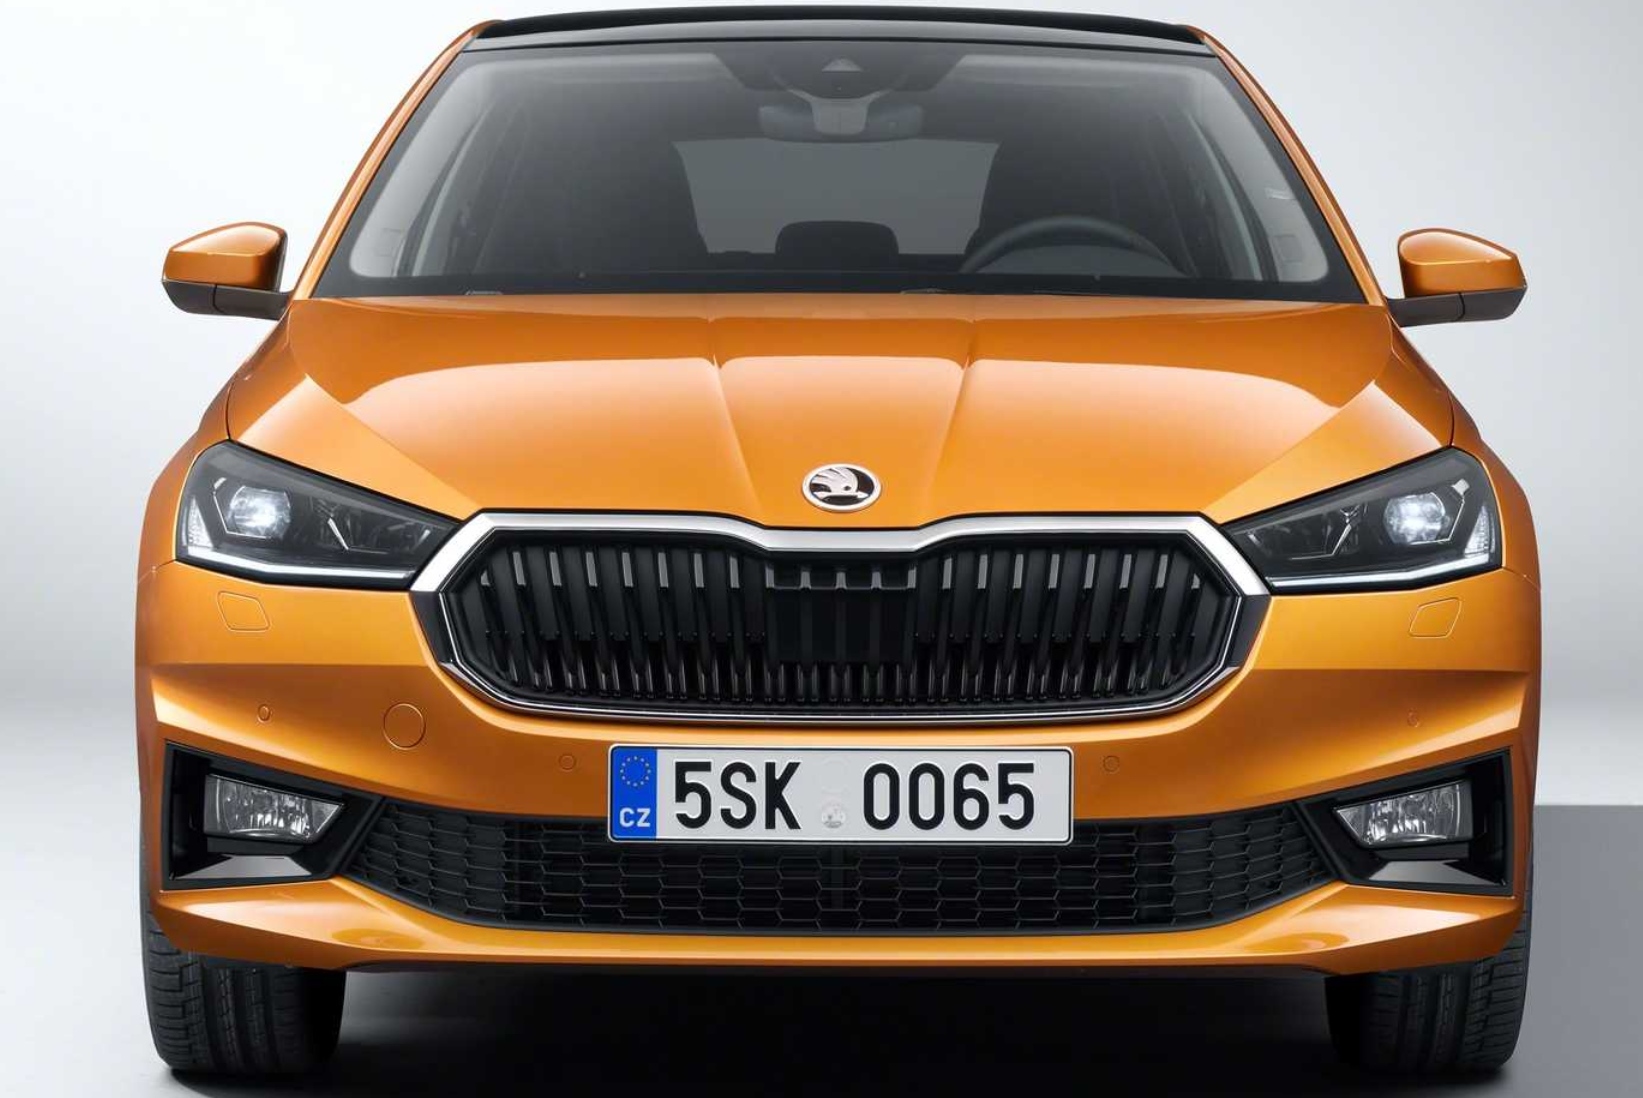 Skoda hopes headlight design will help Kamiq stand out in crowded